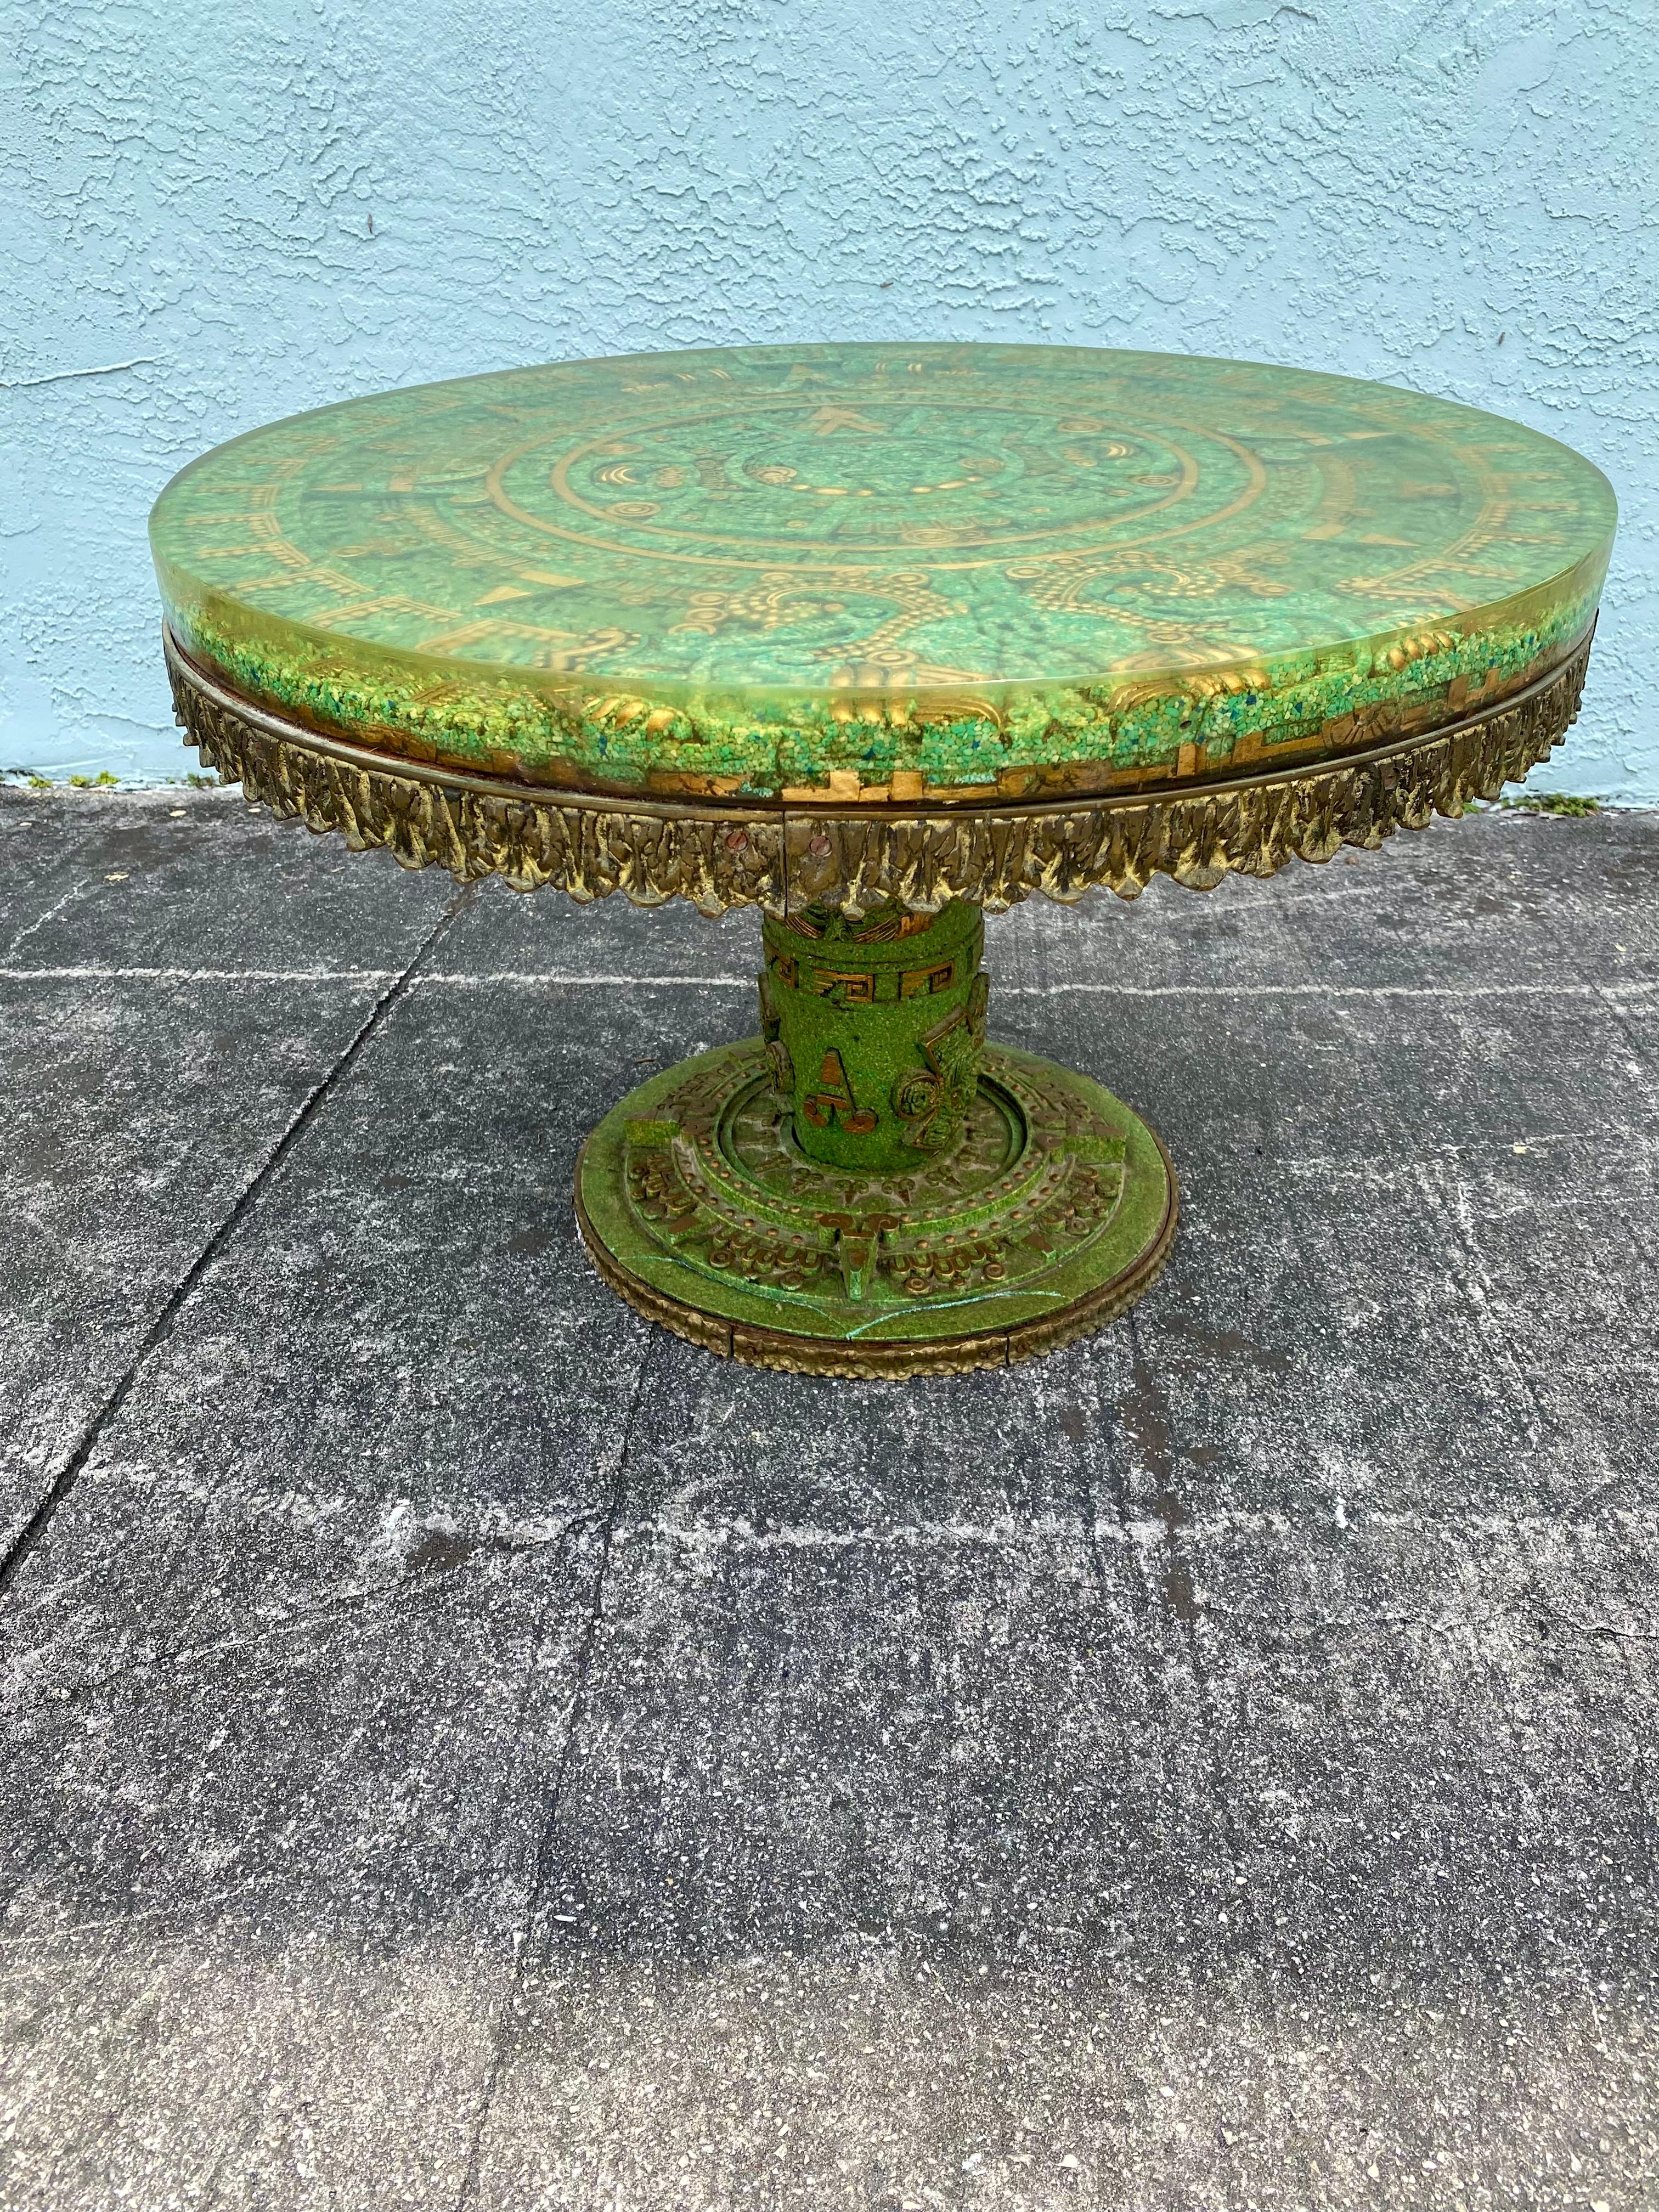 On offer on this occasion is one of the most stunning and rare, Museum quality, architectural Aztec Calendar coffee table you could hope to find. Outstanding design is exhibited throughout. The beautiful Brutalist style table is statement piece and